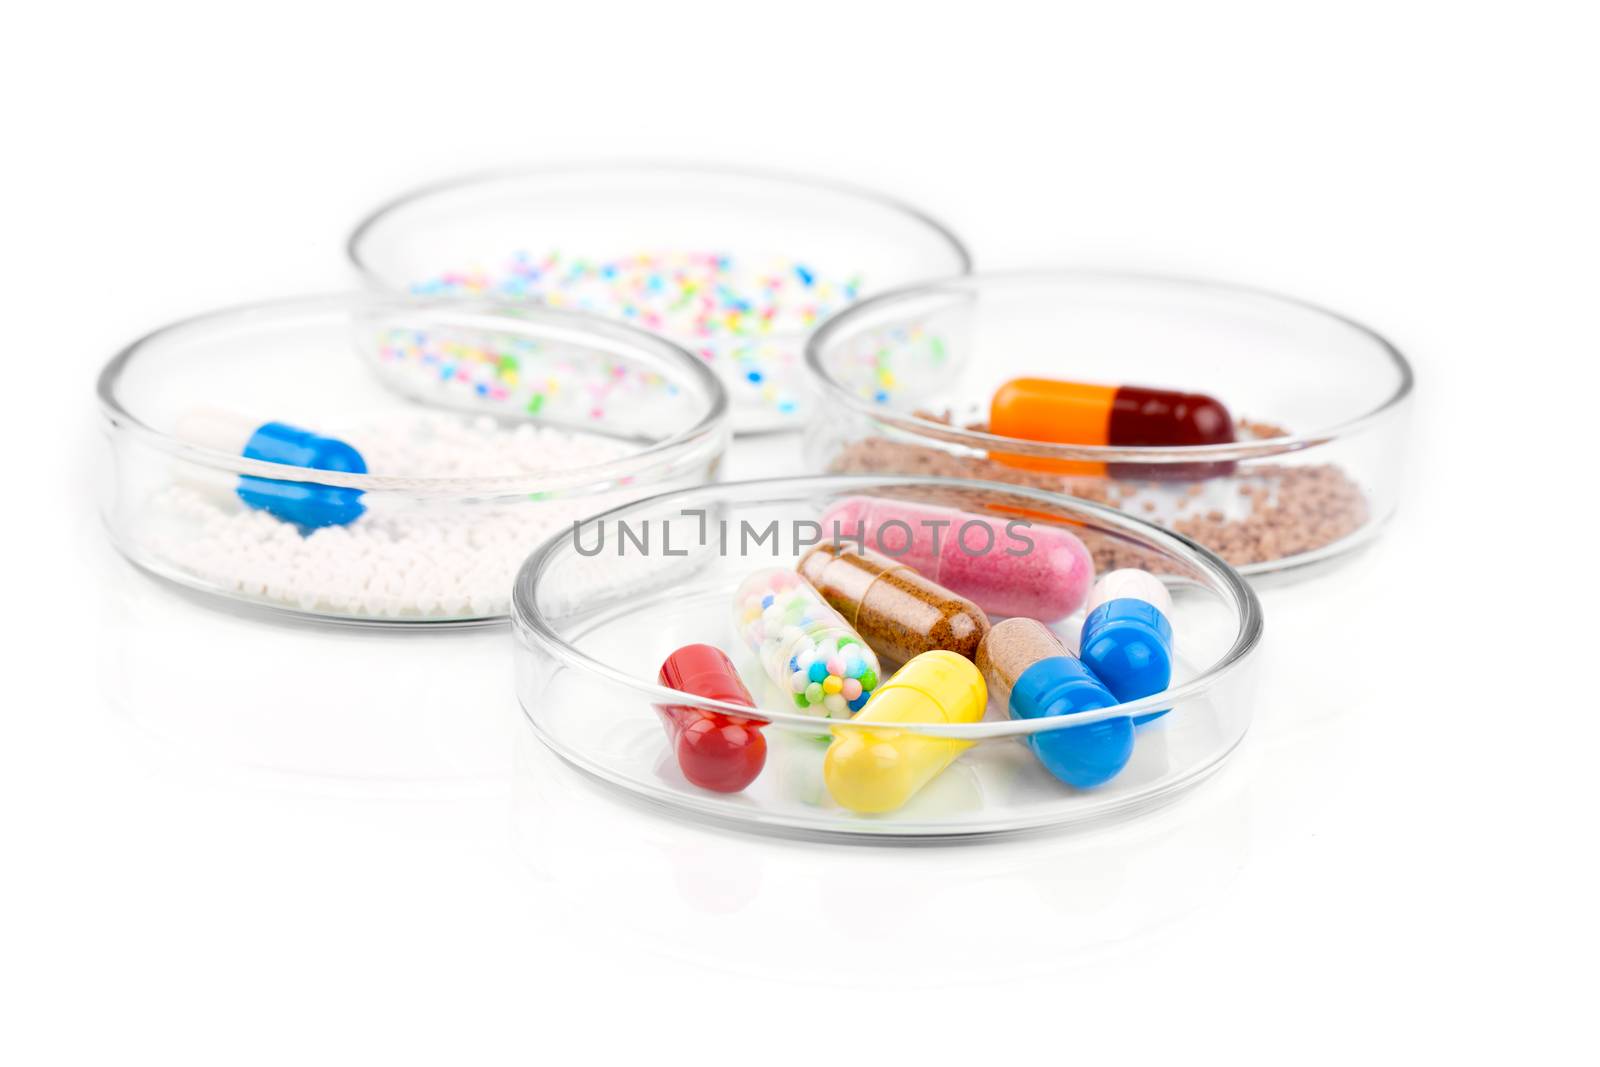 Colorful medical capsules in Petri dishes. Laboratory concept. by motorolka